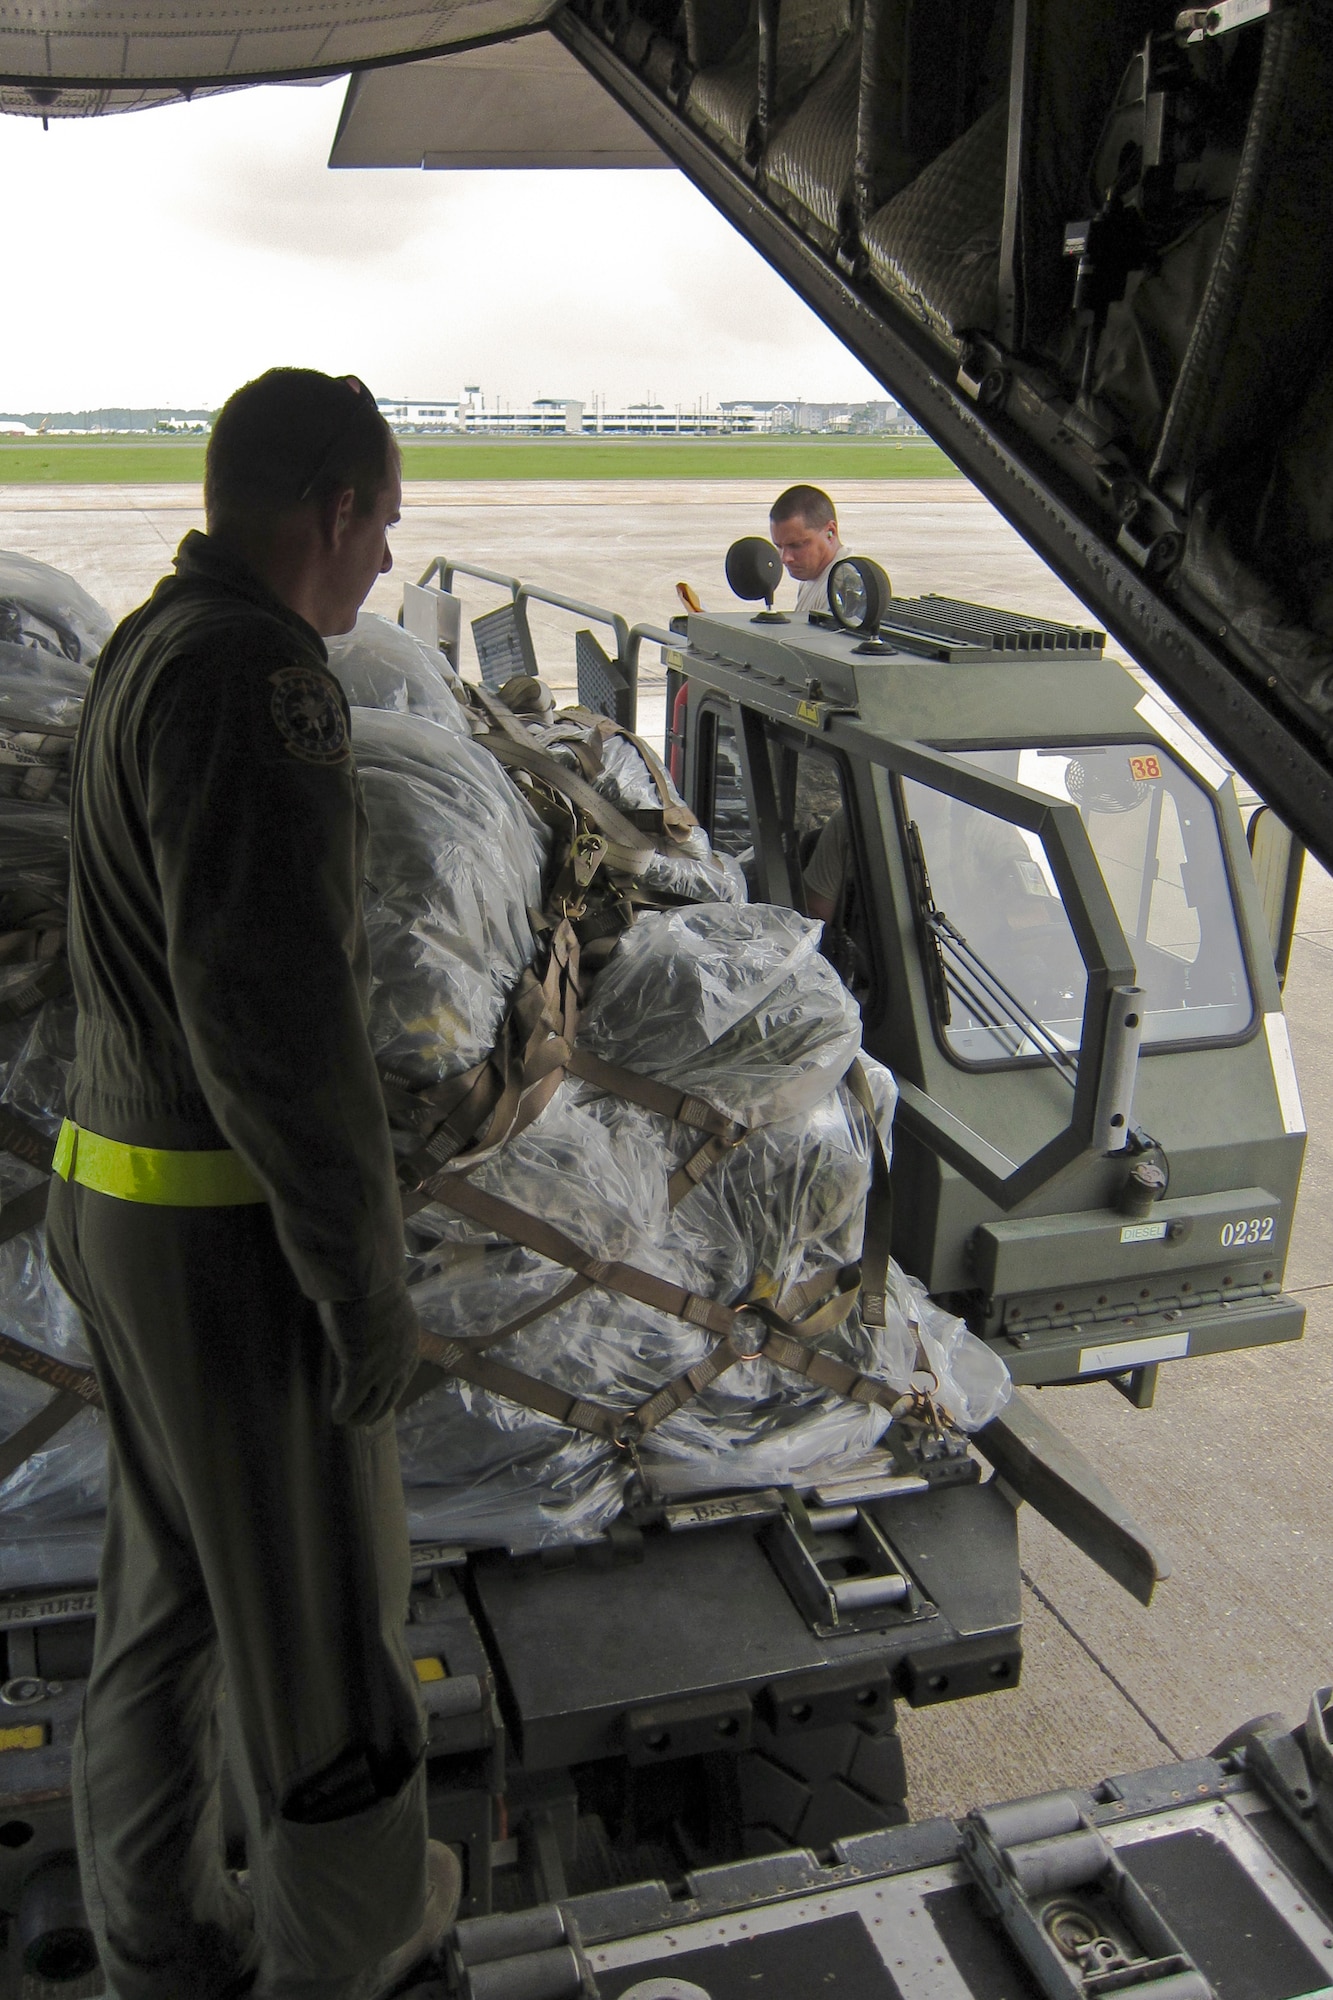 Loadmasters and ramp services personnel from the Kentucky Air Guard's 123rd Airlift Wing offload pallets of cargo from a C-130 onto a K-Loader at the Gulfport Combat Readiness Training Center in Gulfport, Miss., May 18, 2010. The wing was participating in an AMC Operational Readiness Inspection. (U.S. Air Force photo/Maj. Dale Greer)(Released)